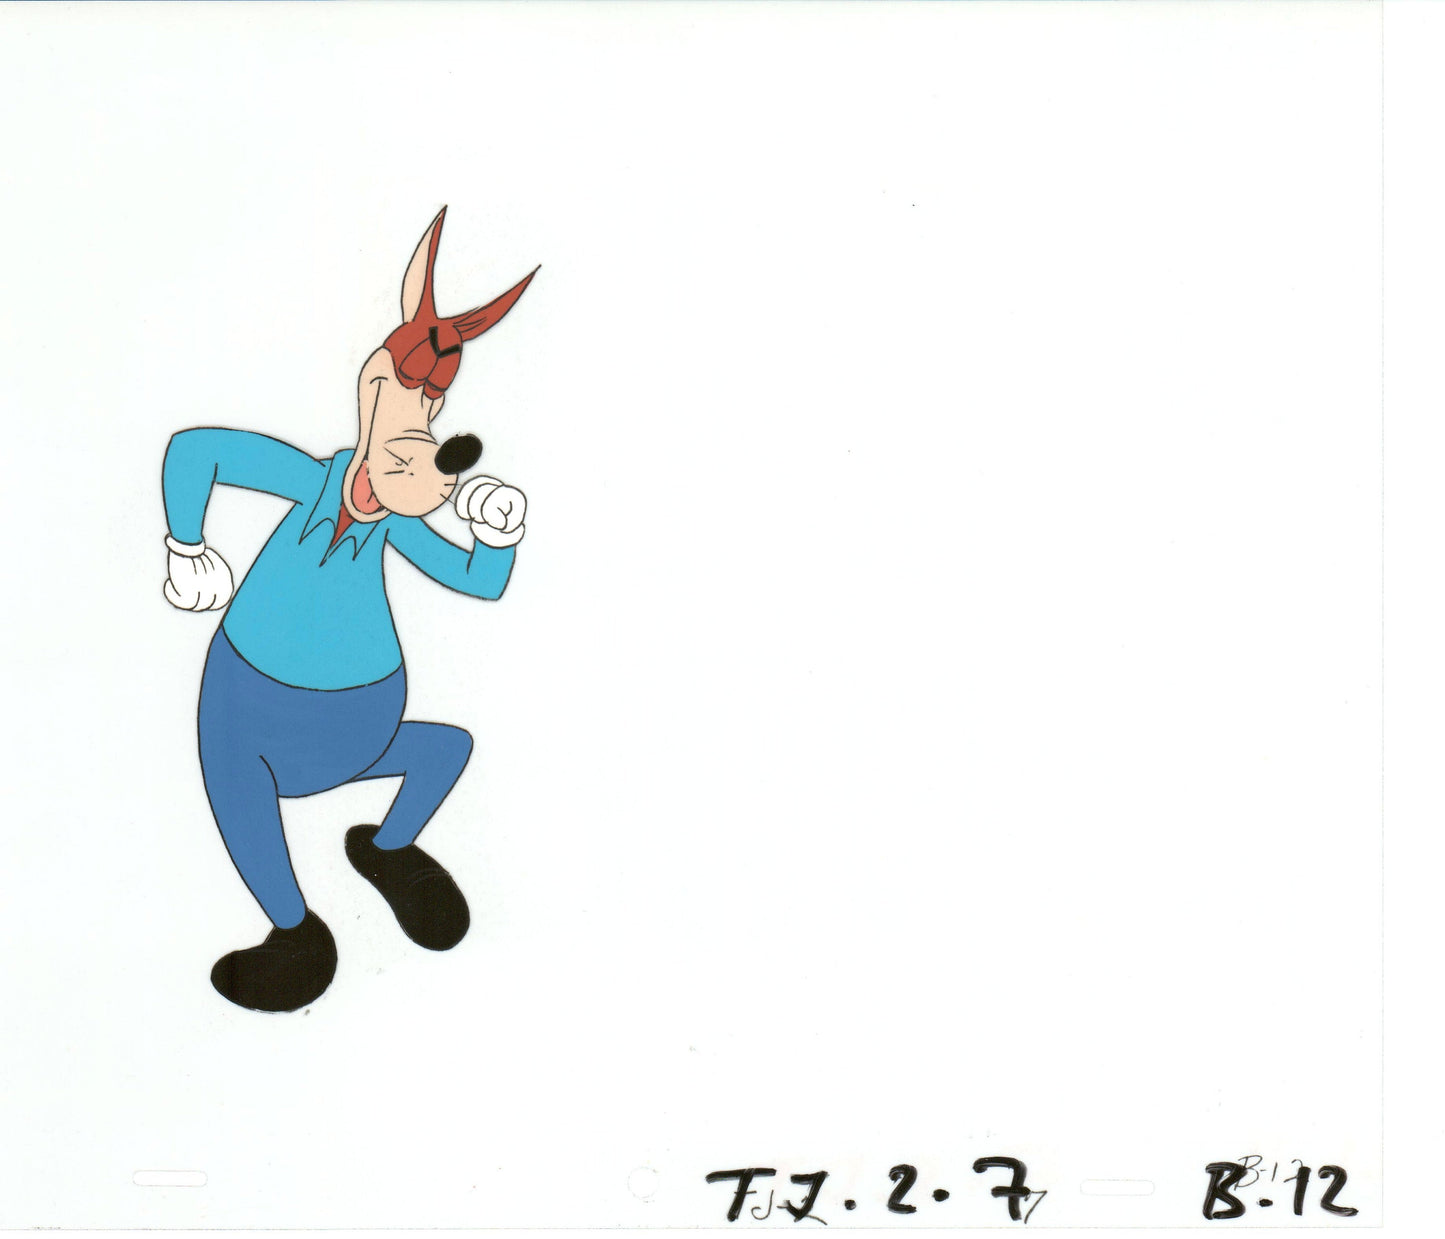 Tom & Jerry Original Production Animation Cel from Filmation 1980-82 b4373